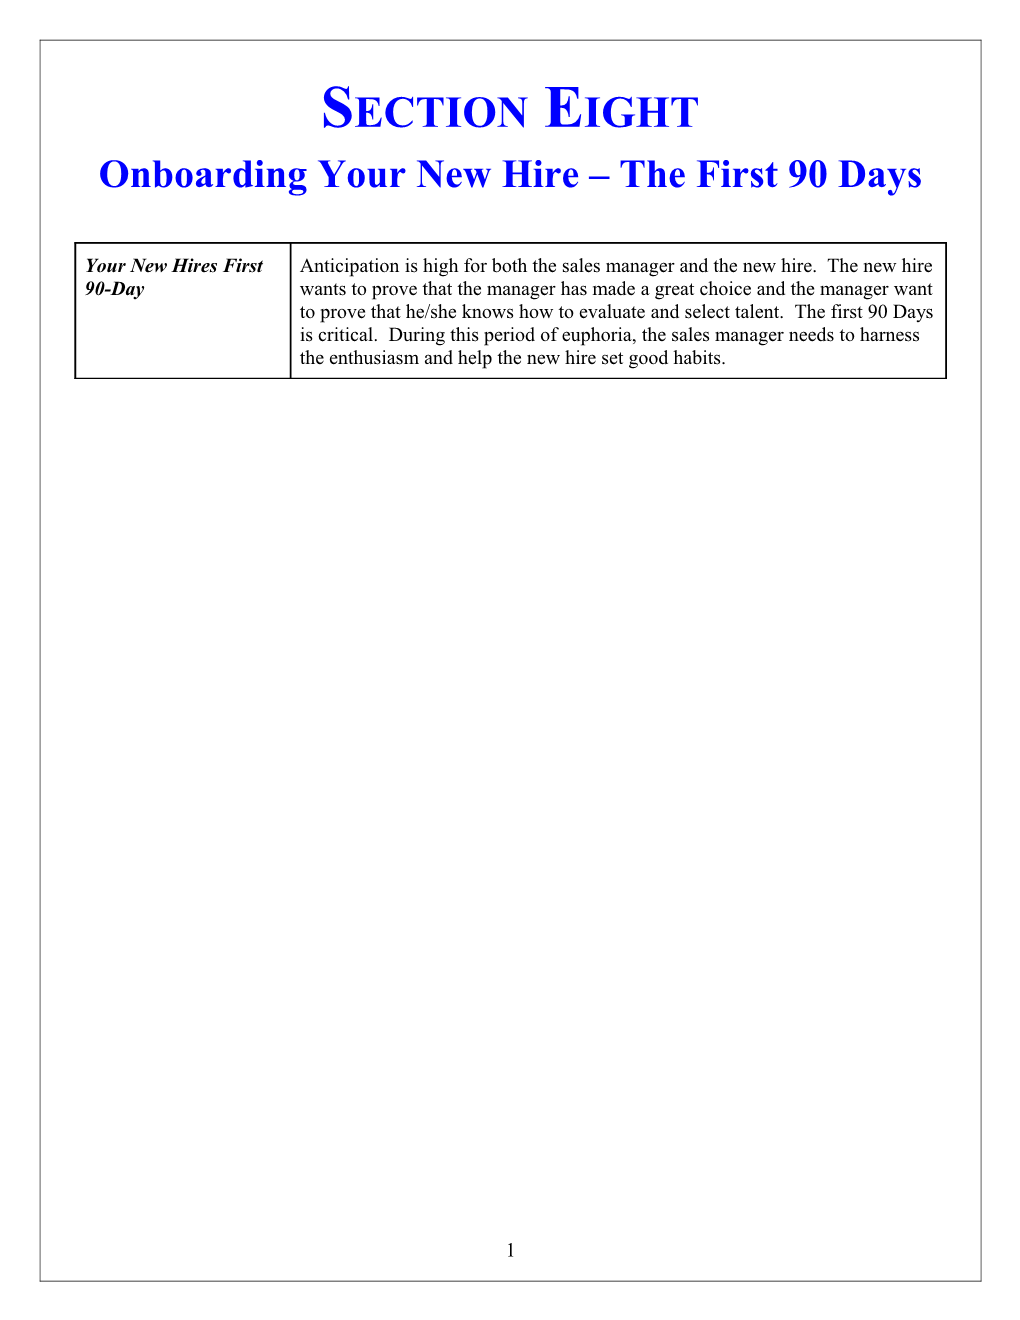 Part 2 Onboarding Your New Hire the First 90 Days